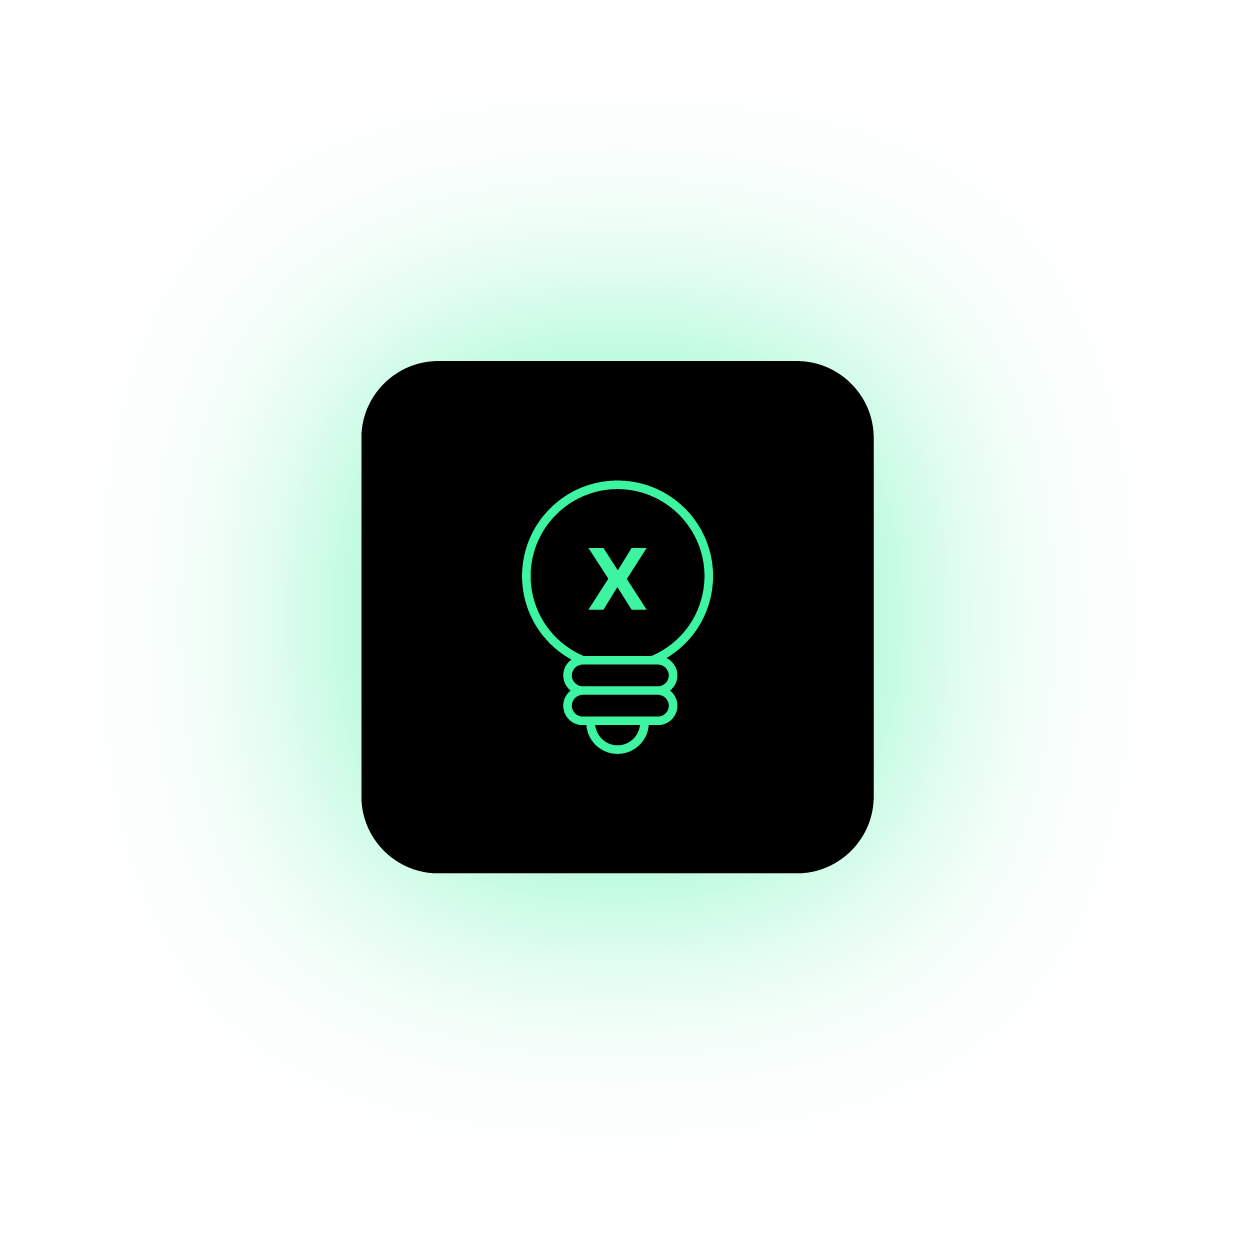 An icon of a ligh bulb that represents the Tech & Innovation track.